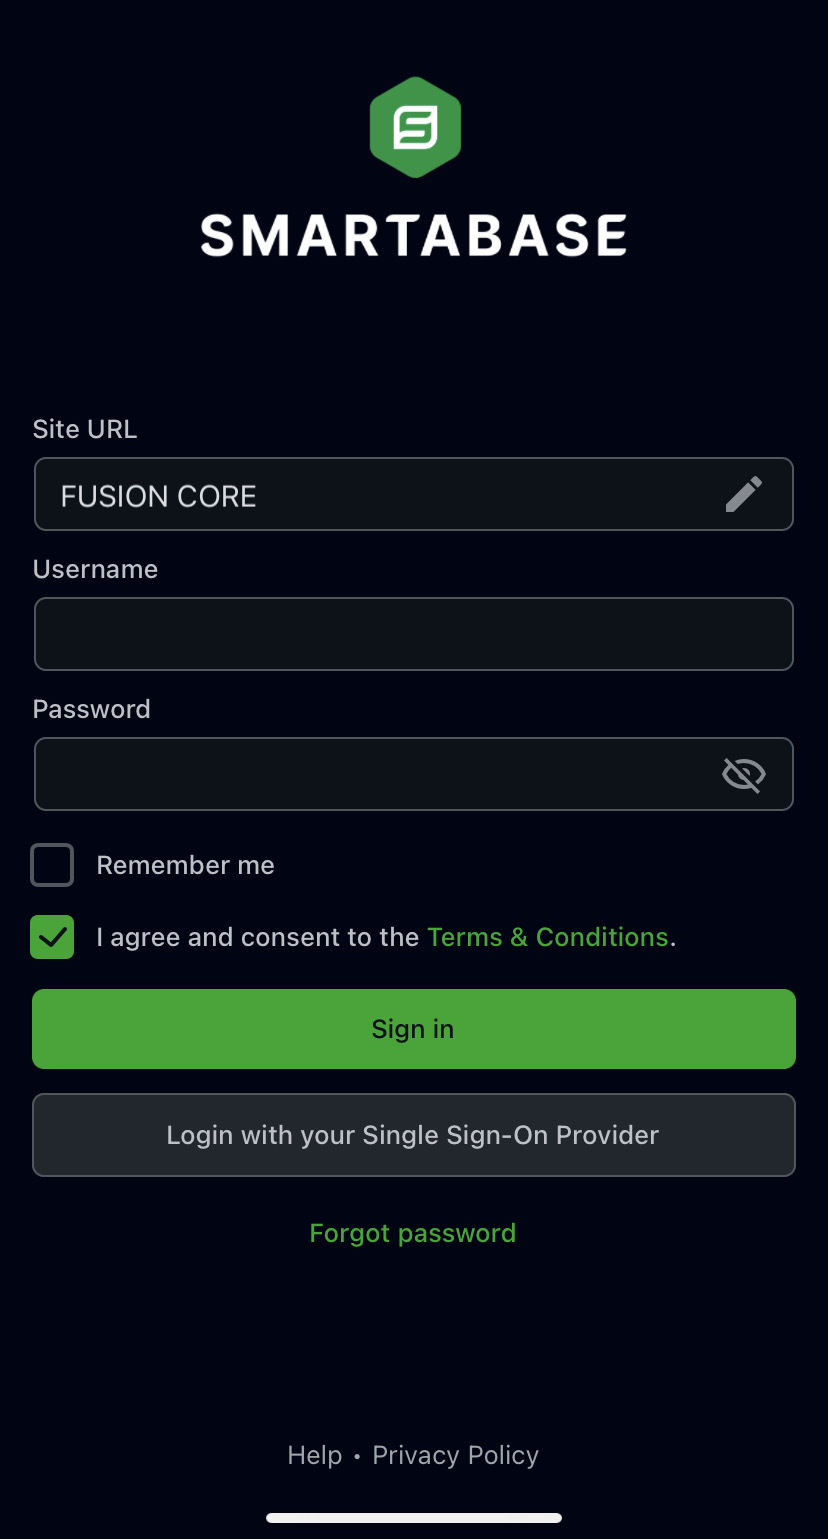 An example recording of logging into the Smartabase app using single sign-on.